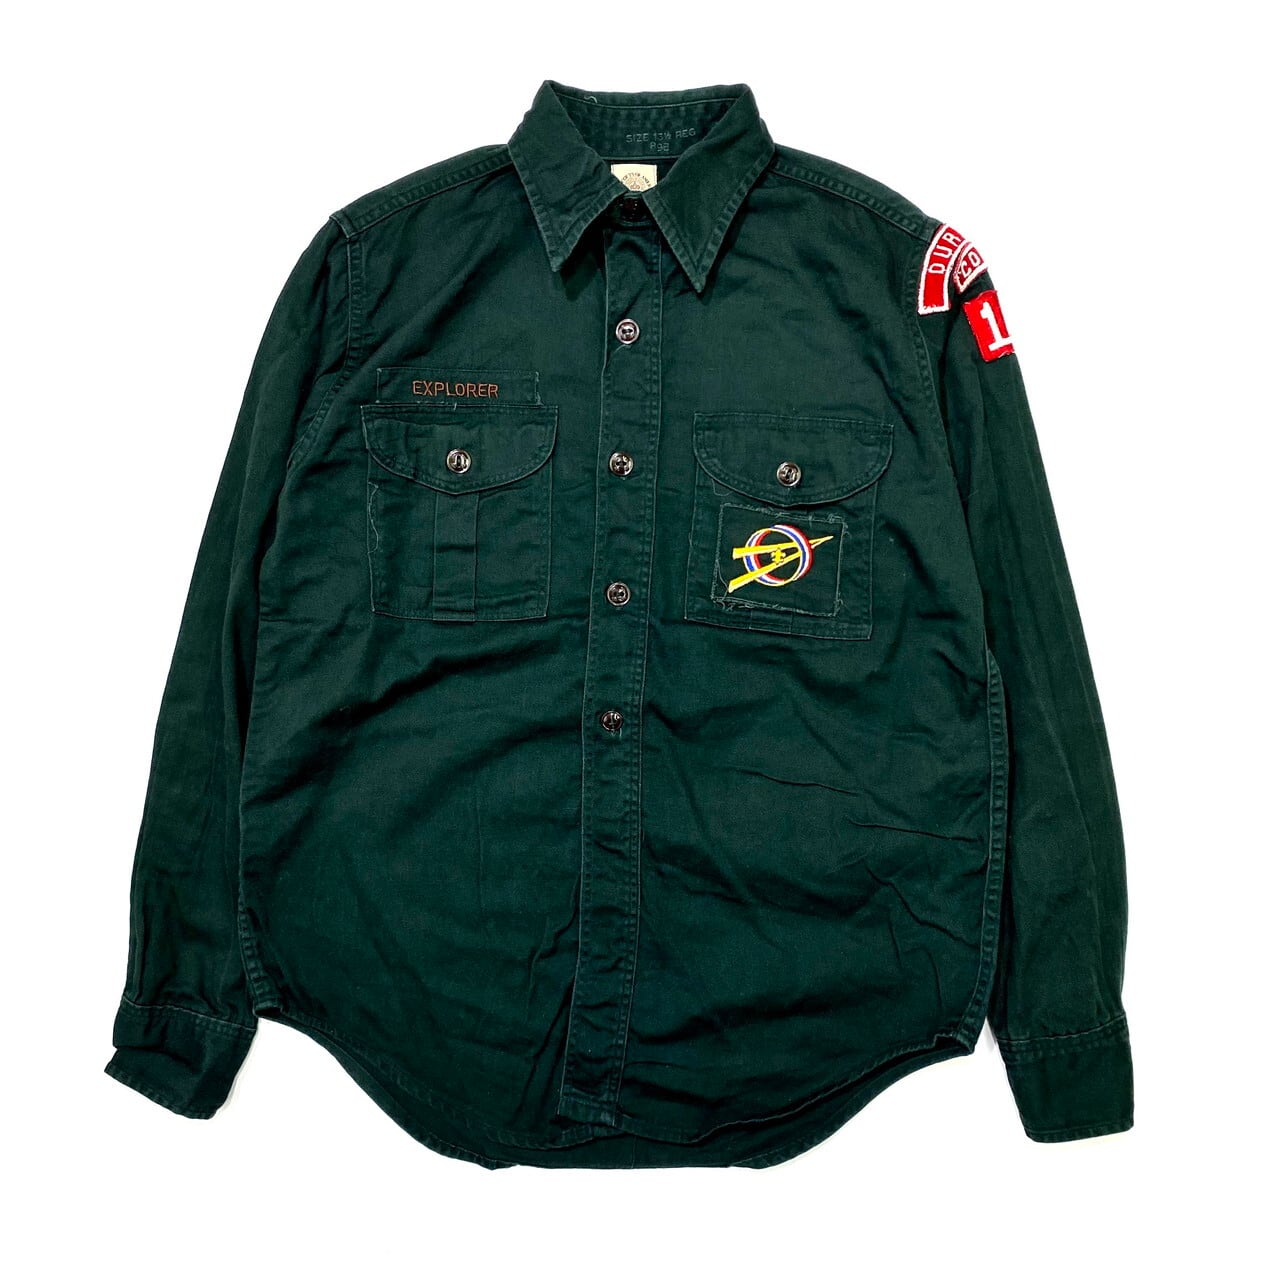 BOY SCOUTS JACKET ボーイスカウト　ヴィンテージ　1960’ｓ